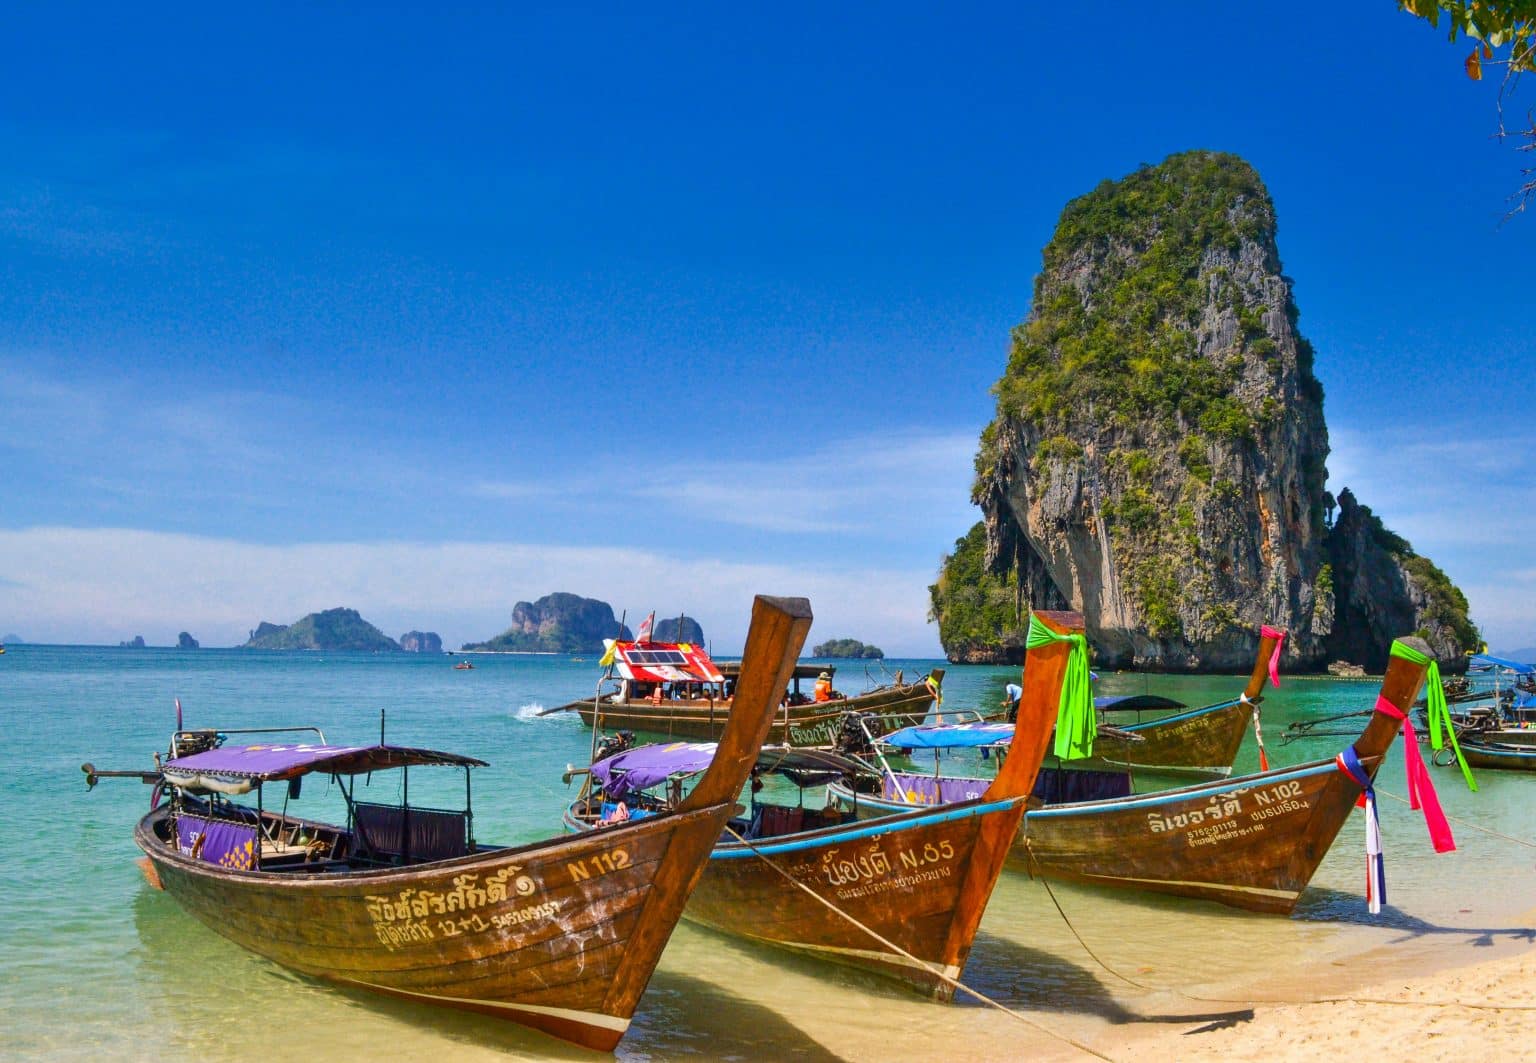 Phuket beach which is often visited by medical tourists coming to Thailand for hair transplant treatment